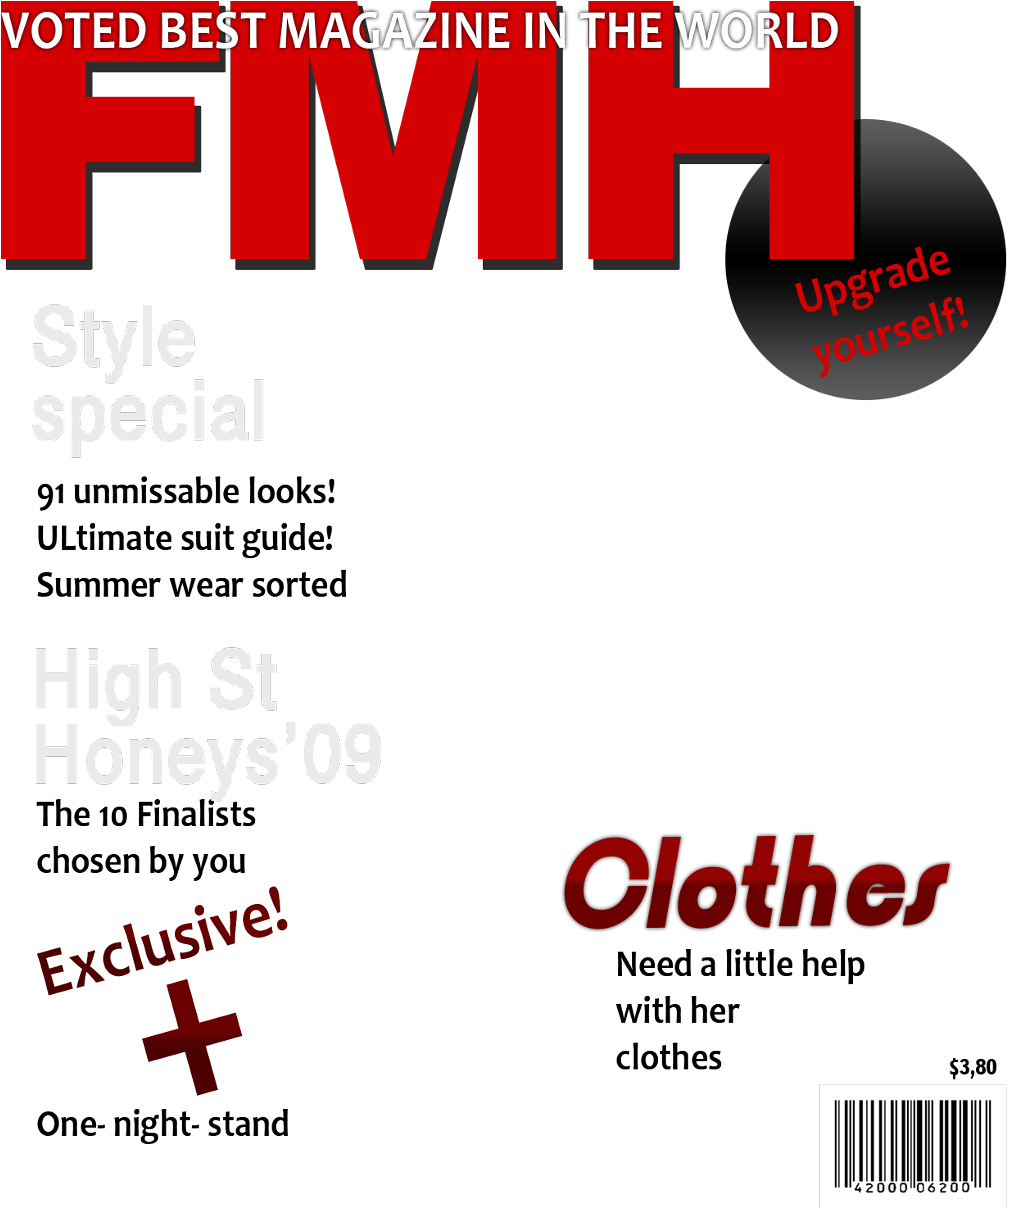 Magazine Cover PNG HD Quality